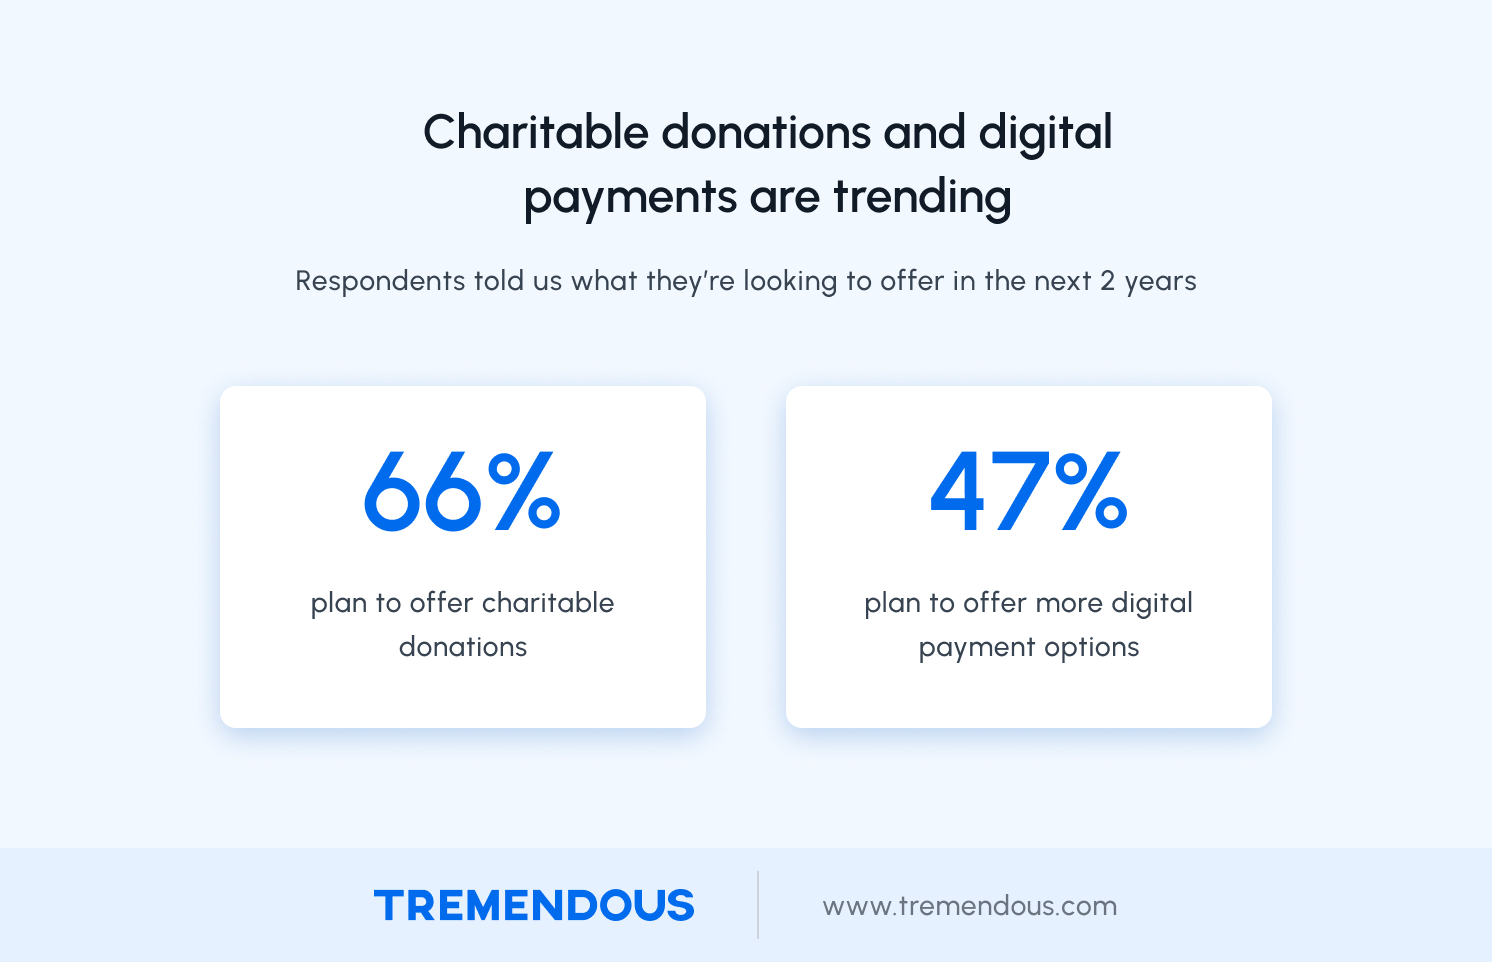 Charitable donations and digital payments are trending